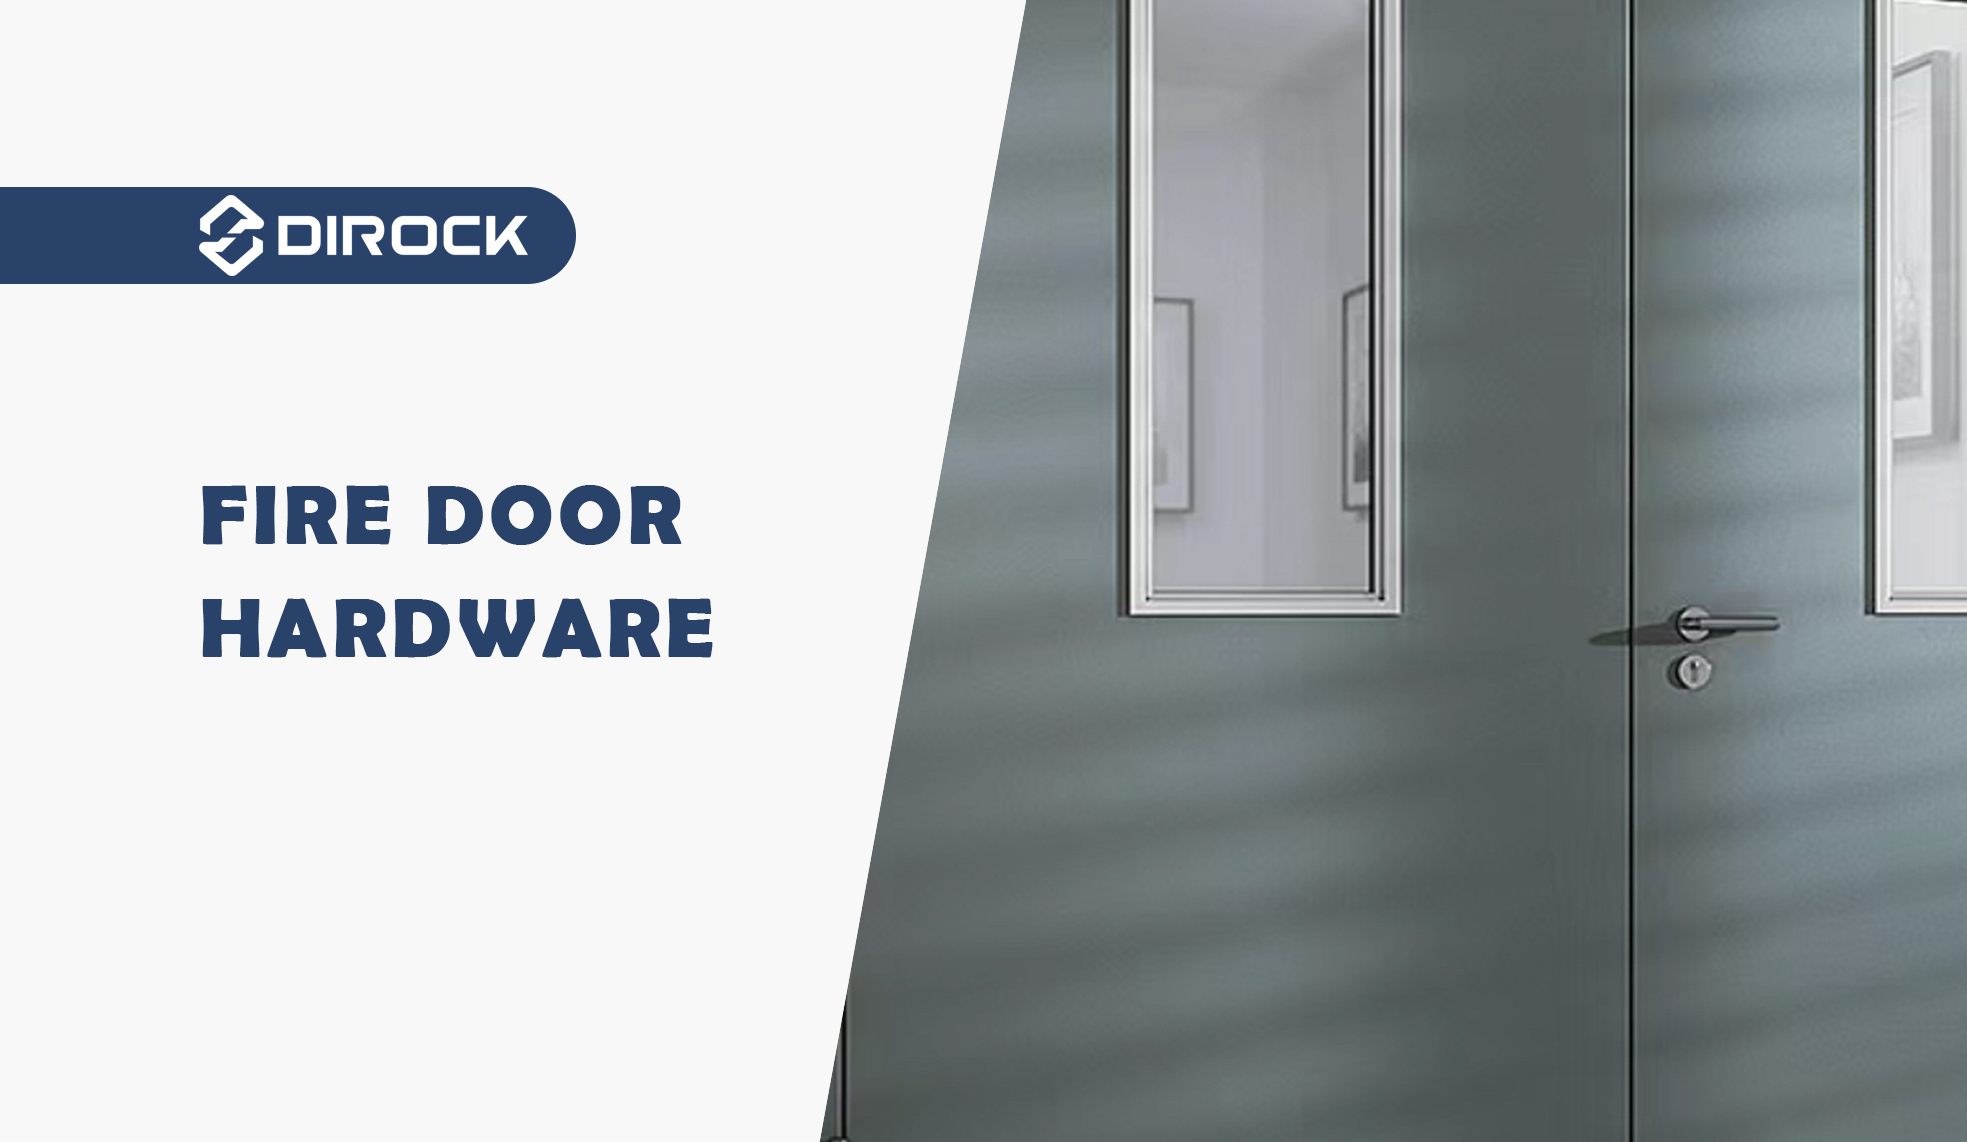 Fire Door Hardware - Understanding the Essentials for Safety, Compliance and Exploring Best Solutions.